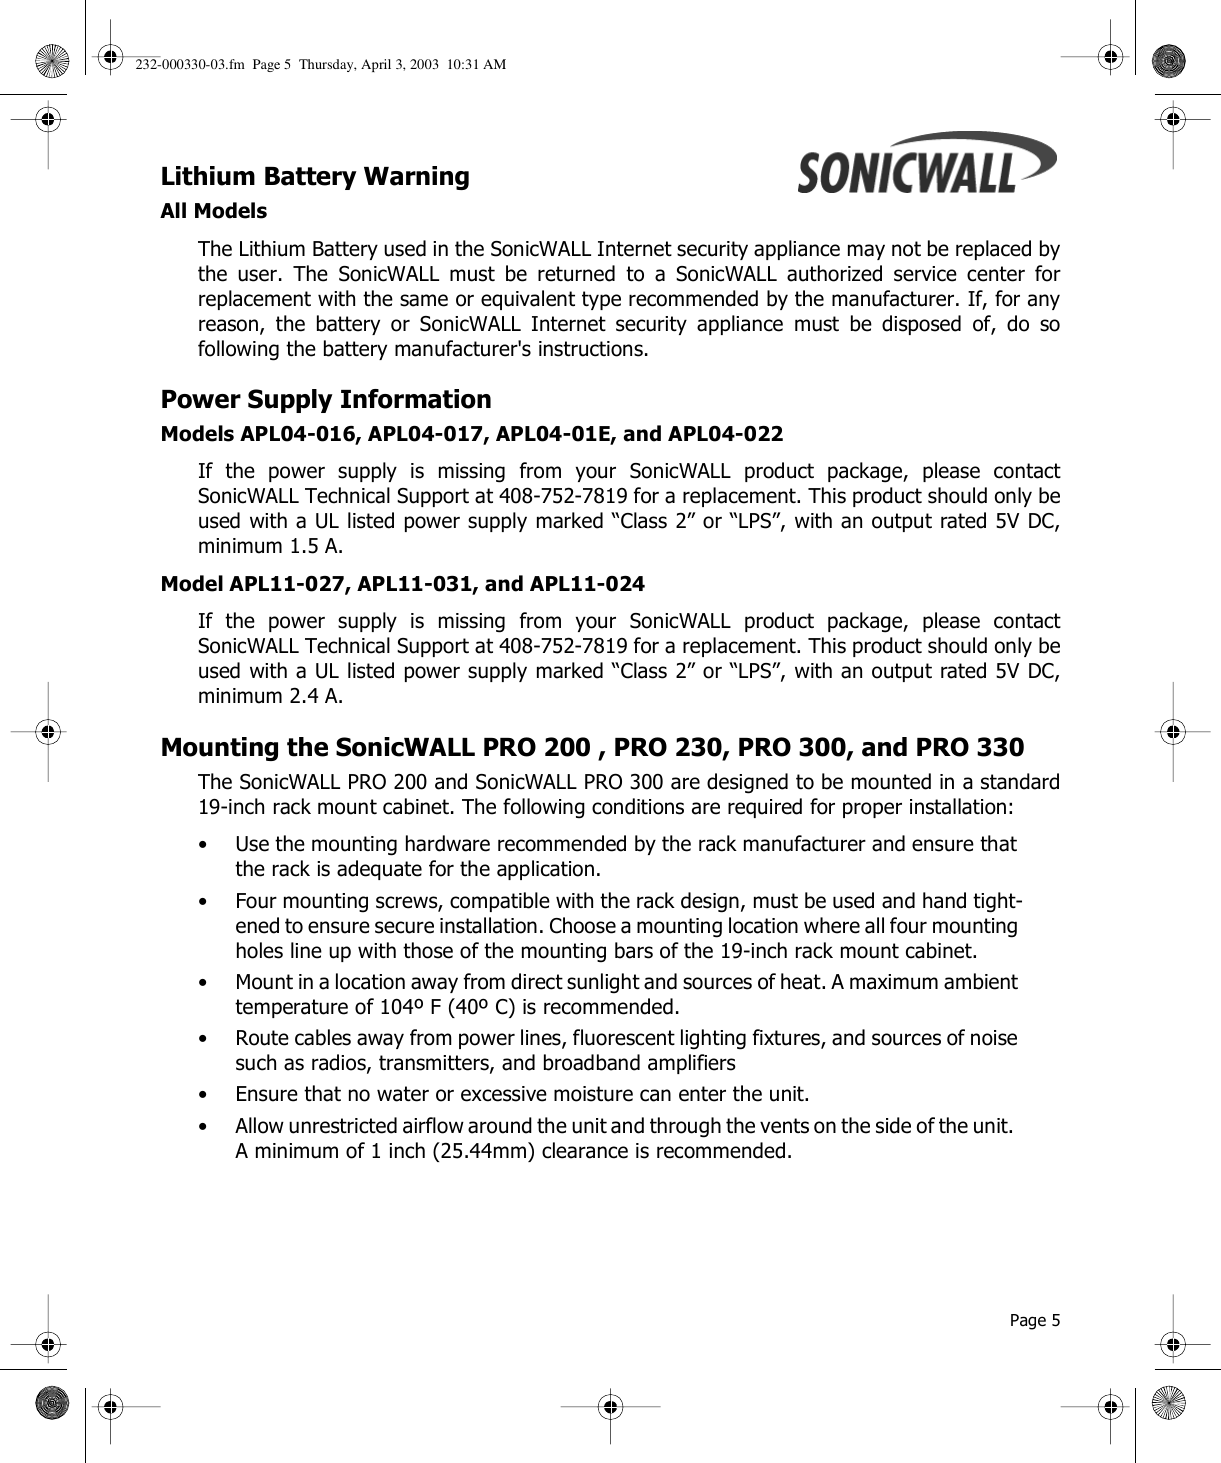  Page 5Lithium Battery Warning All ModelsThe Lithium Battery used in the SonicWALL Internet security appliance may not be replaced bythe user. The SonicWALL must be returned to a SonicWALL authorized service center forreplacement with the same or equivalent type recommended by the manufacturer. If, for anyreason, the battery or SonicWALL Internet security appliance must be disposed of, do sofollowing the battery manufacturer&apos;s instructions. Power Supply InformationModels APL04-016, APL04-017, APL04-01E, and APL04-022If the power supply is missing from your SonicWALL product package, please contactSonicWALL Technical Support at 408-752-7819 for a replacement. This product should only beused with a UL listed power supply marked “Class 2” or “LPS”, with an output rated 5V DC,minimum 1.5 A. Model APL11-027, APL11-031, and APL11-024If the power supply is missing from your SonicWALL product package, please contactSonicWALL Technical Support at 408-752-7819 for a replacement. This product should only beused with a UL listed power supply marked “Class 2” or “LPS”, with an output rated 5V DC,minimum 2.4 A.Mounting the SonicWALL PRO 200 , PRO 230, PRO 300, and PRO 330The SonicWALL PRO 200 and SonicWALL PRO 300 are designed to be mounted in a standard19-inch rack mount cabinet. The following conditions are required for proper installation:• Use the mounting hardware recommended by the rack manufacturer and ensure that the rack is adequate for the application.• Four mounting screws, compatible with the rack design, must be used and hand tight-ened to ensure secure installation. Choose a mounting location where all four mounting holes line up with those of the mounting bars of the 19-inch rack mount cabinet.• Mount in a location away from direct sunlight and sources of heat. A maximum ambient temperature of 104º F (40º C) is recommended.• Route cables away from power lines, fluorescent lighting fixtures, and sources of noise such as radios, transmitters, and broadband amplifiers• Ensure that no water or excessive moisture can enter the unit.• Allow unrestricted airflow around the unit and through the vents on the side of the unit.  A minimum of 1 inch (25.44mm) clearance is recommended.232-000330-03.fm  Page 5  Thursday, April 3, 2003  10:31 AM